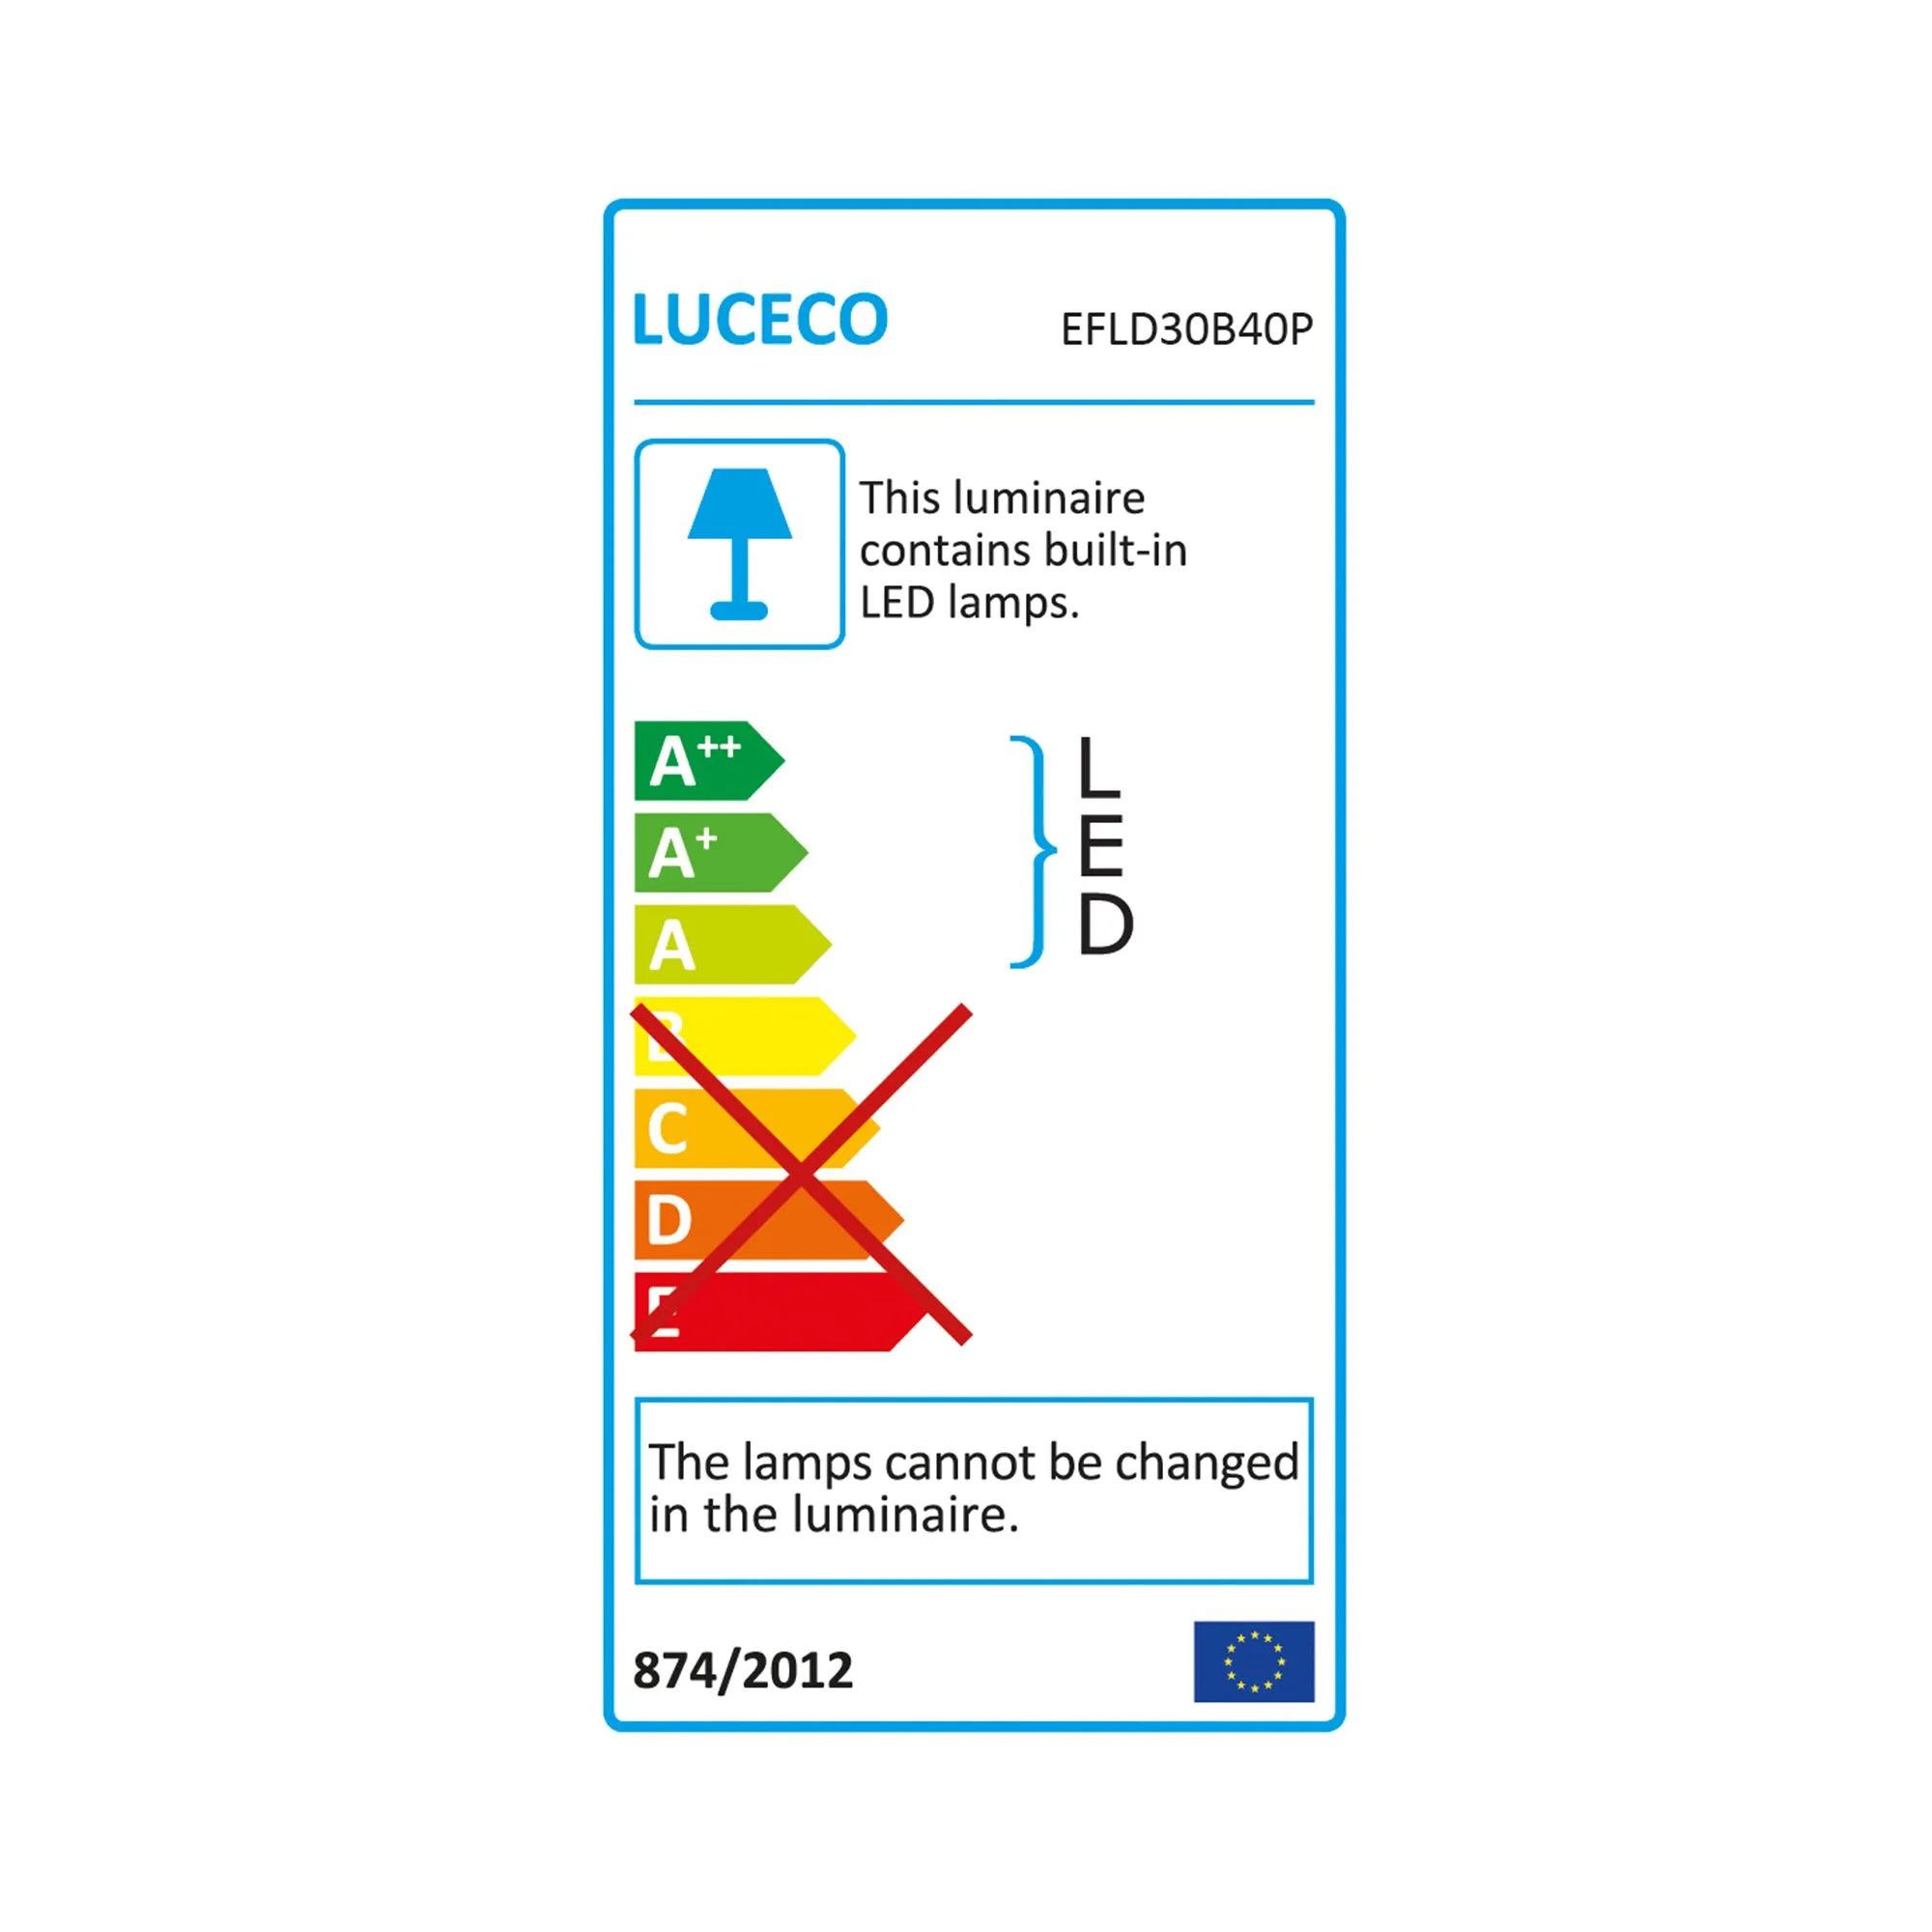 Luceco Black Mains-powered Cool white Outdoor LED PIR Floodlight 2400lm